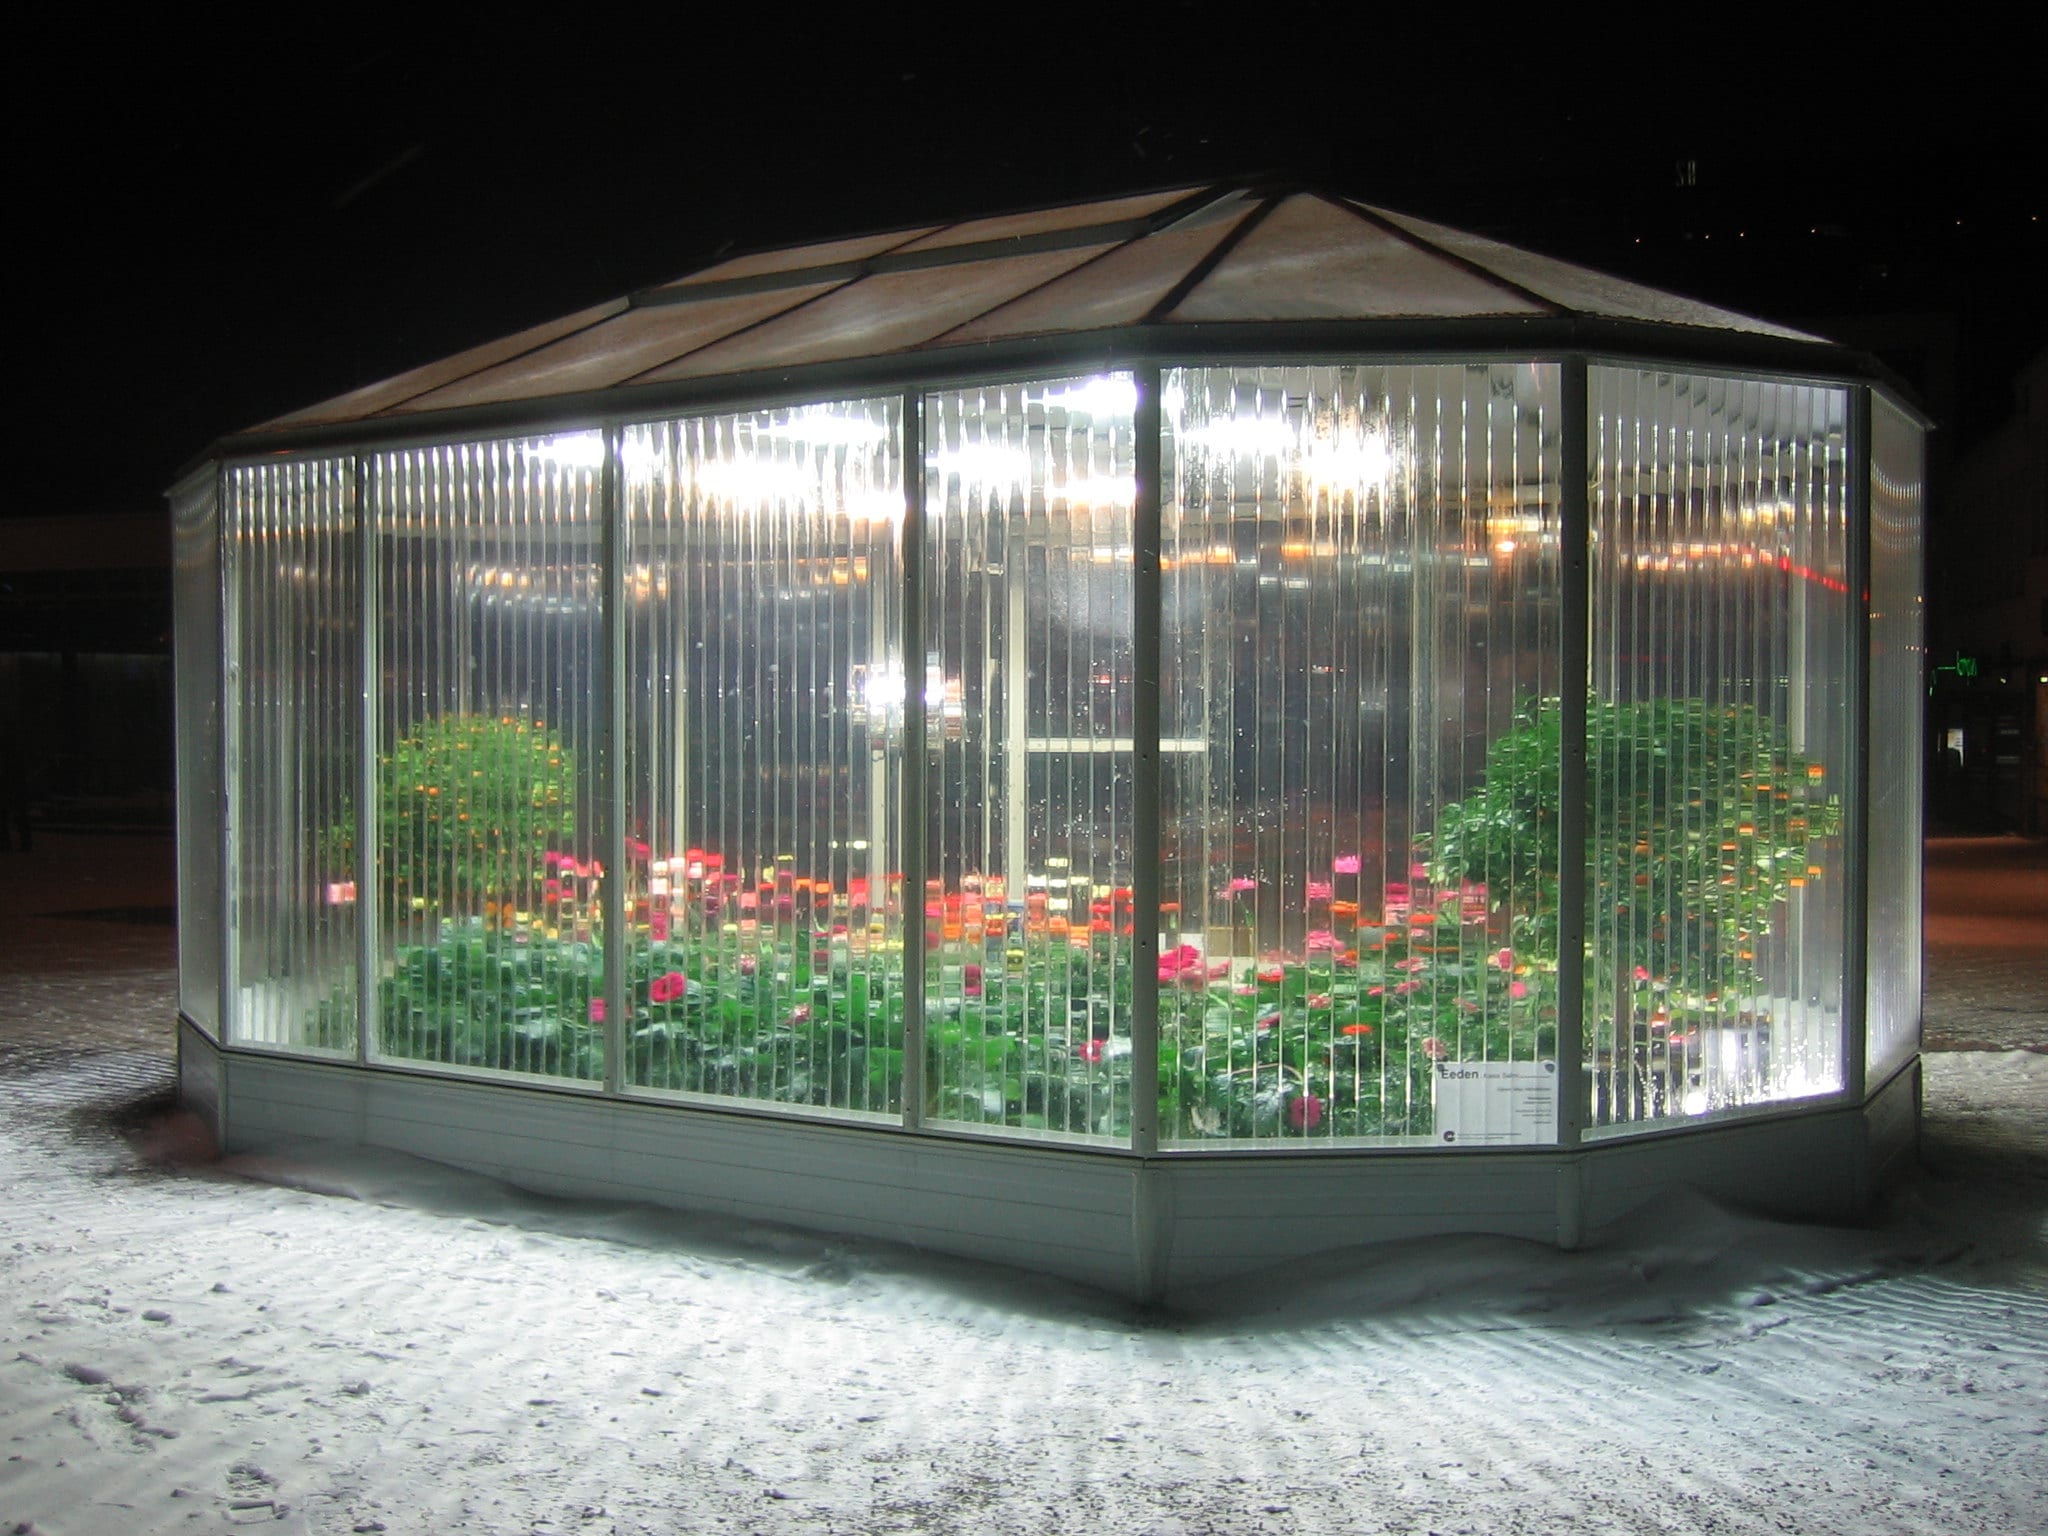 How Much Does It Cost To Get A Greenhouse For Planting Vegetables And Fruits In Winter In The USA